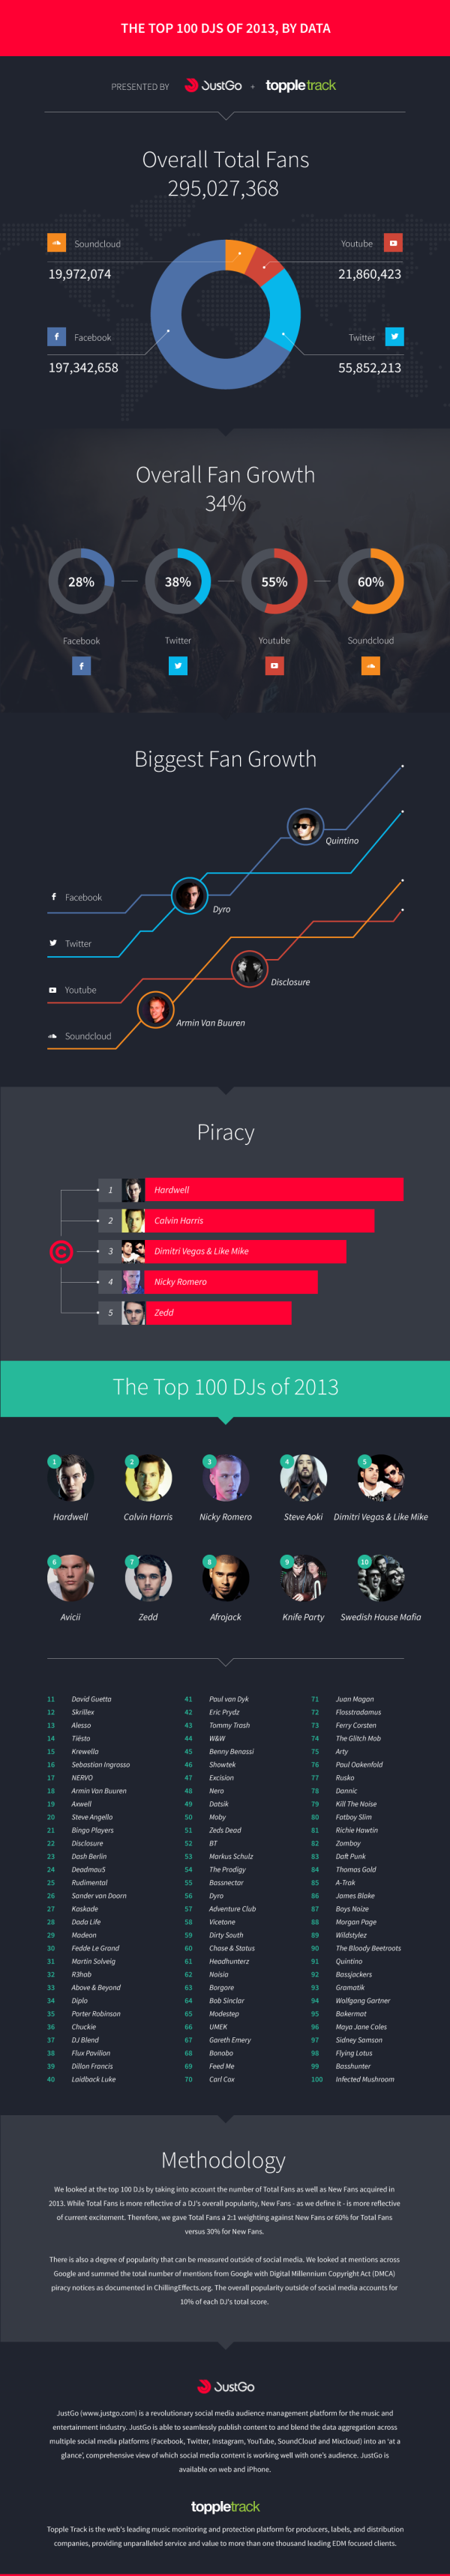 Top 100 DJS of 2013, by Data infographic